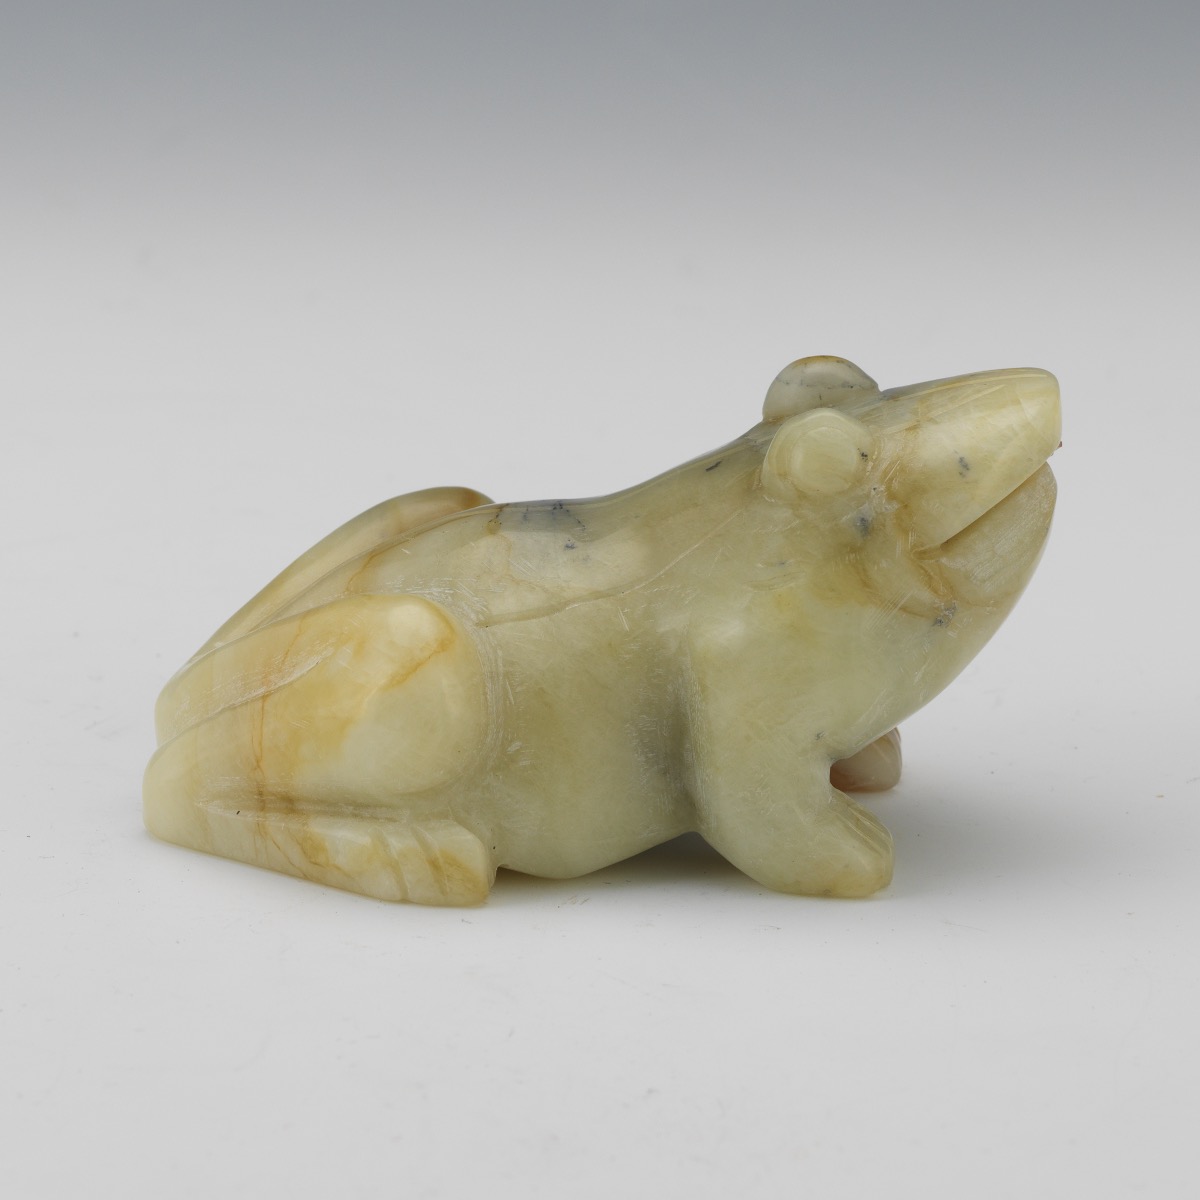 Chinese Carved Agate and Carnelian Lucky Frog Cabinet Sculpture, in Presentation Box - Image 2 of 8